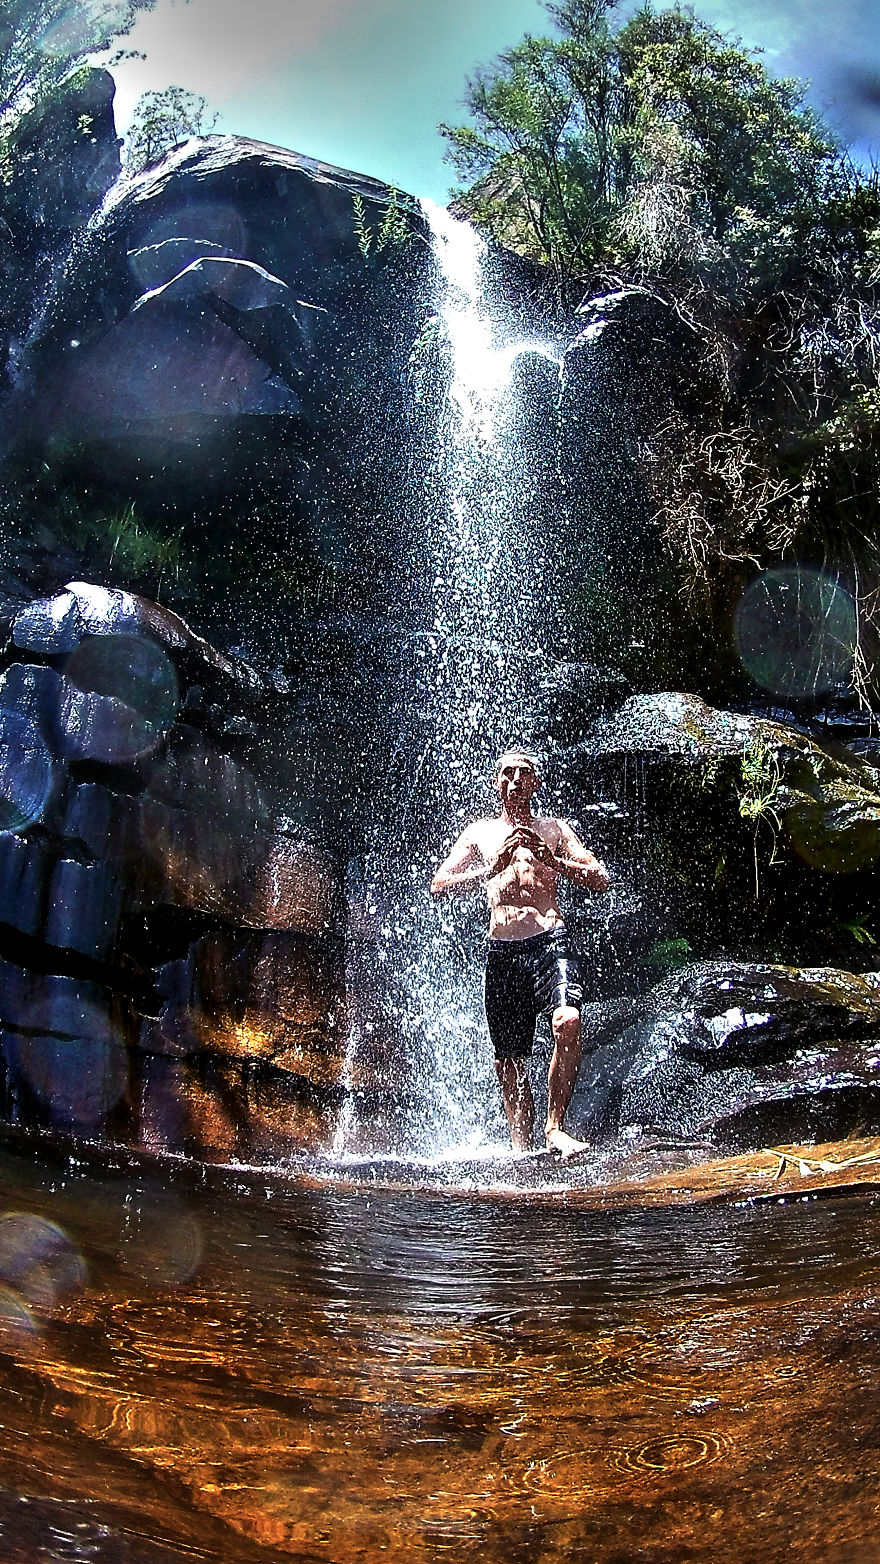 I Travelled To The Rocklands - South Africa To Climb. I Had To Capture Its Beauty.